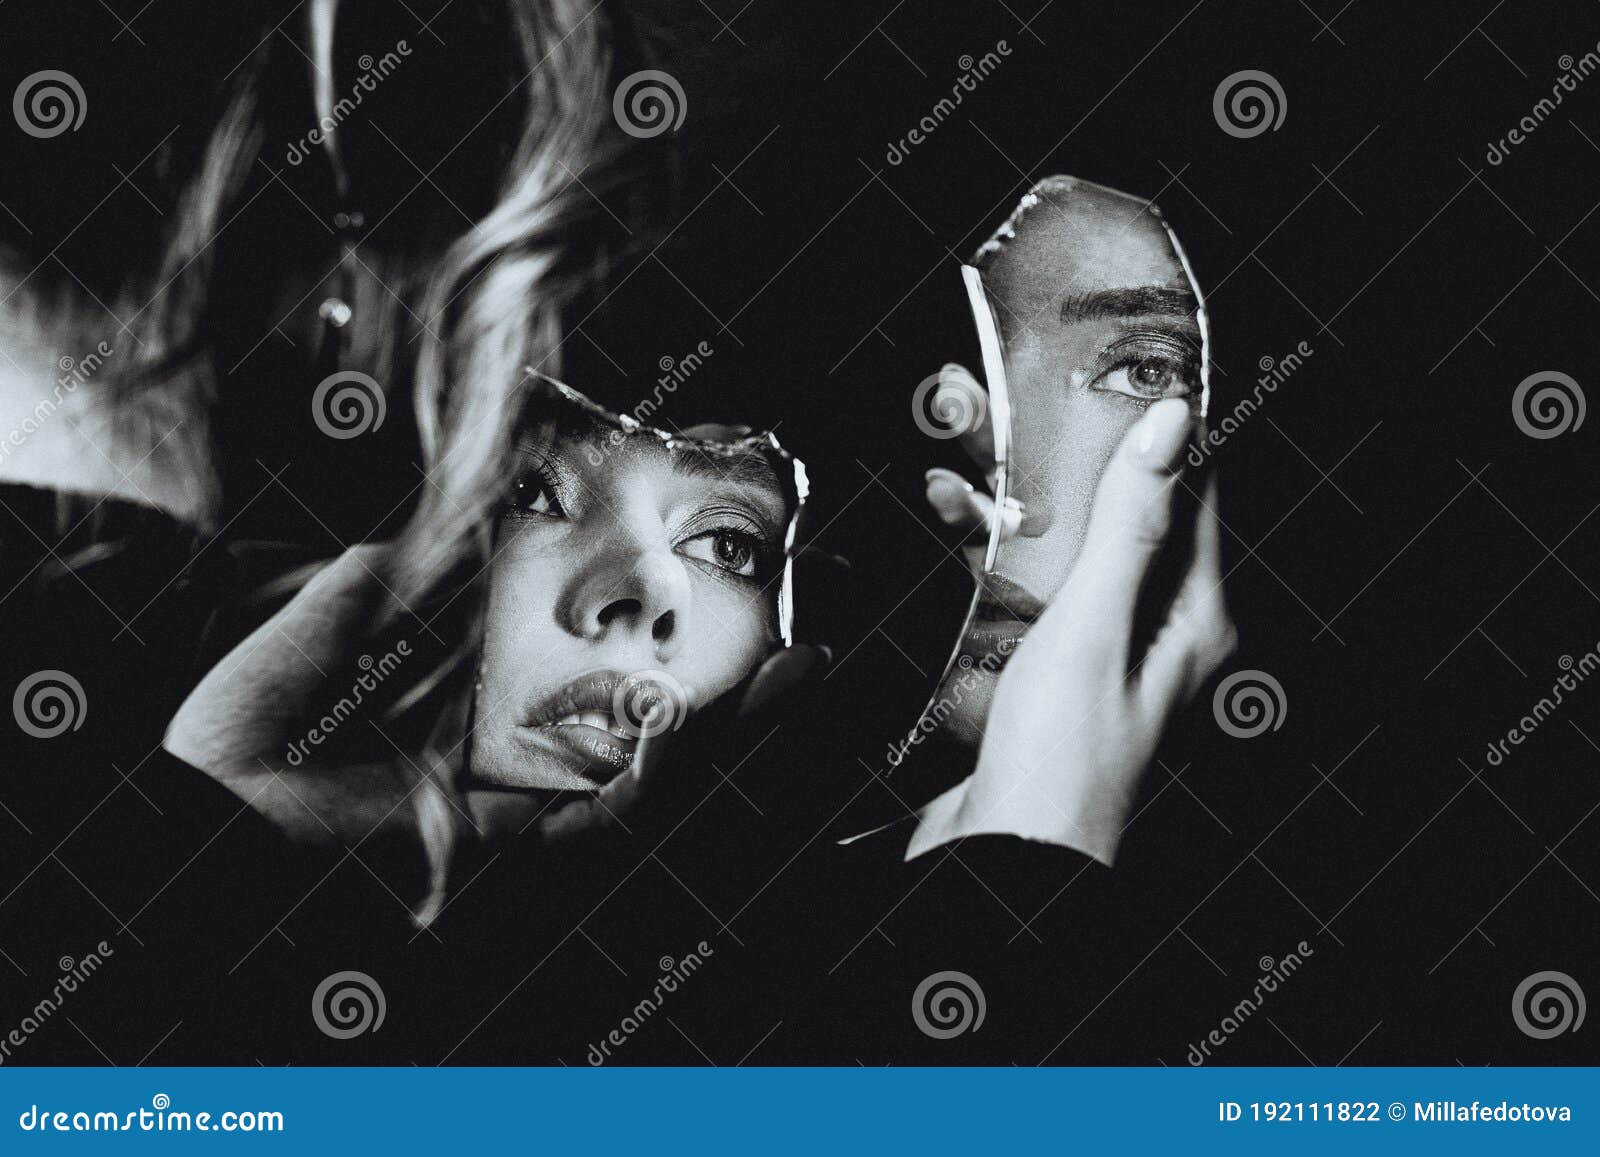 lovely woman looking at broken self-image mirror, black and white retro portrait